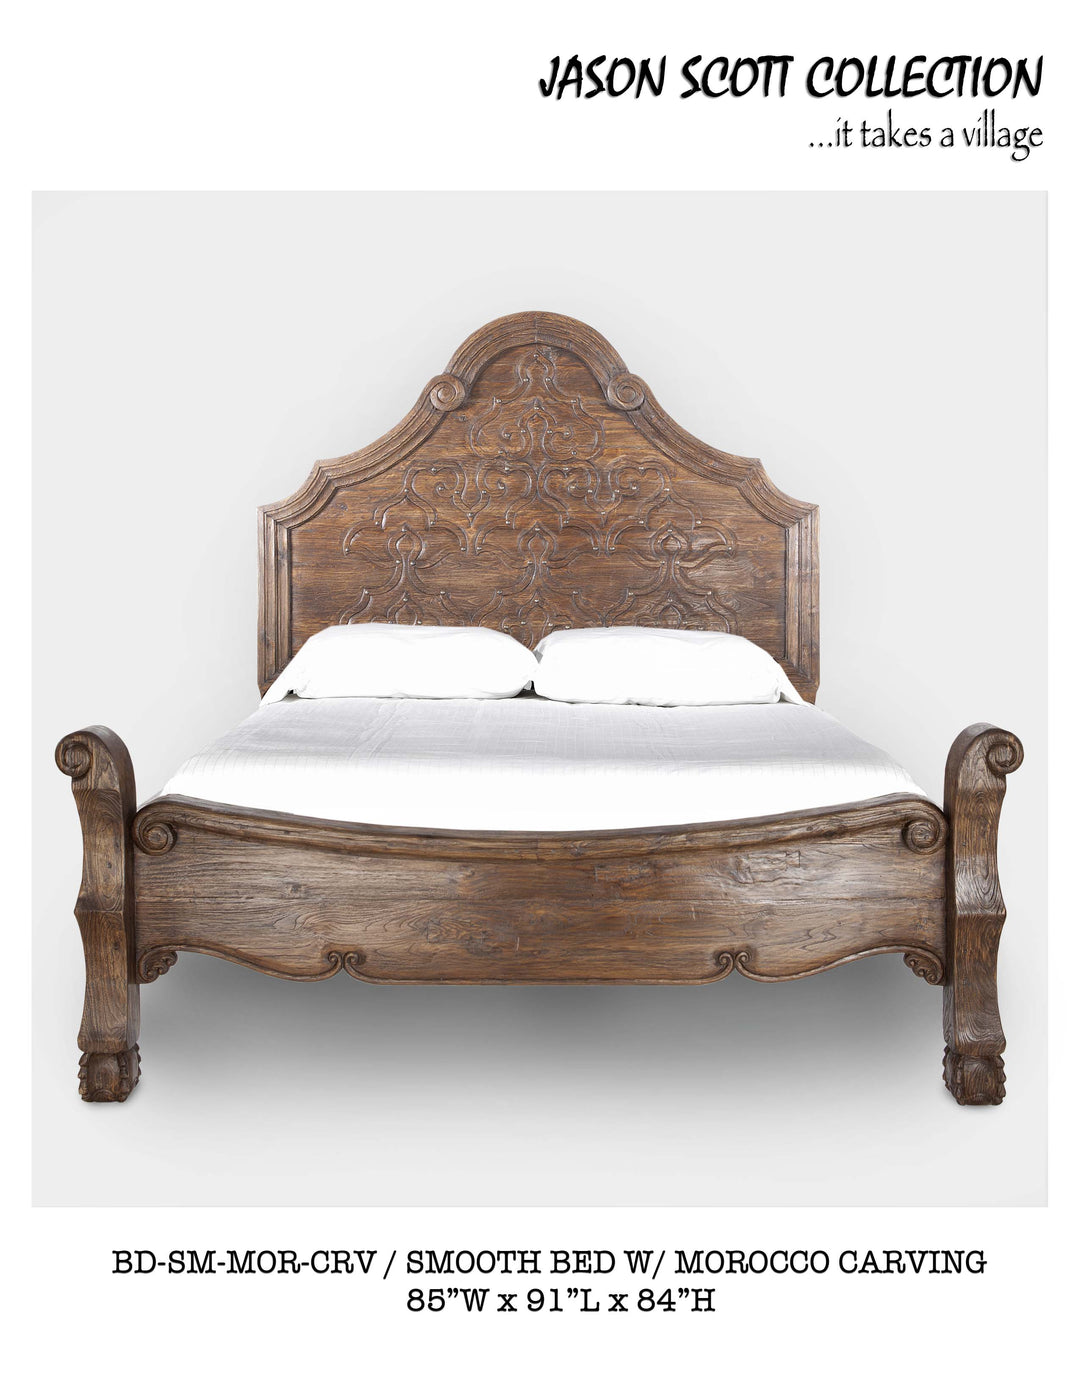 Smooth Bed (Morocco Carving)